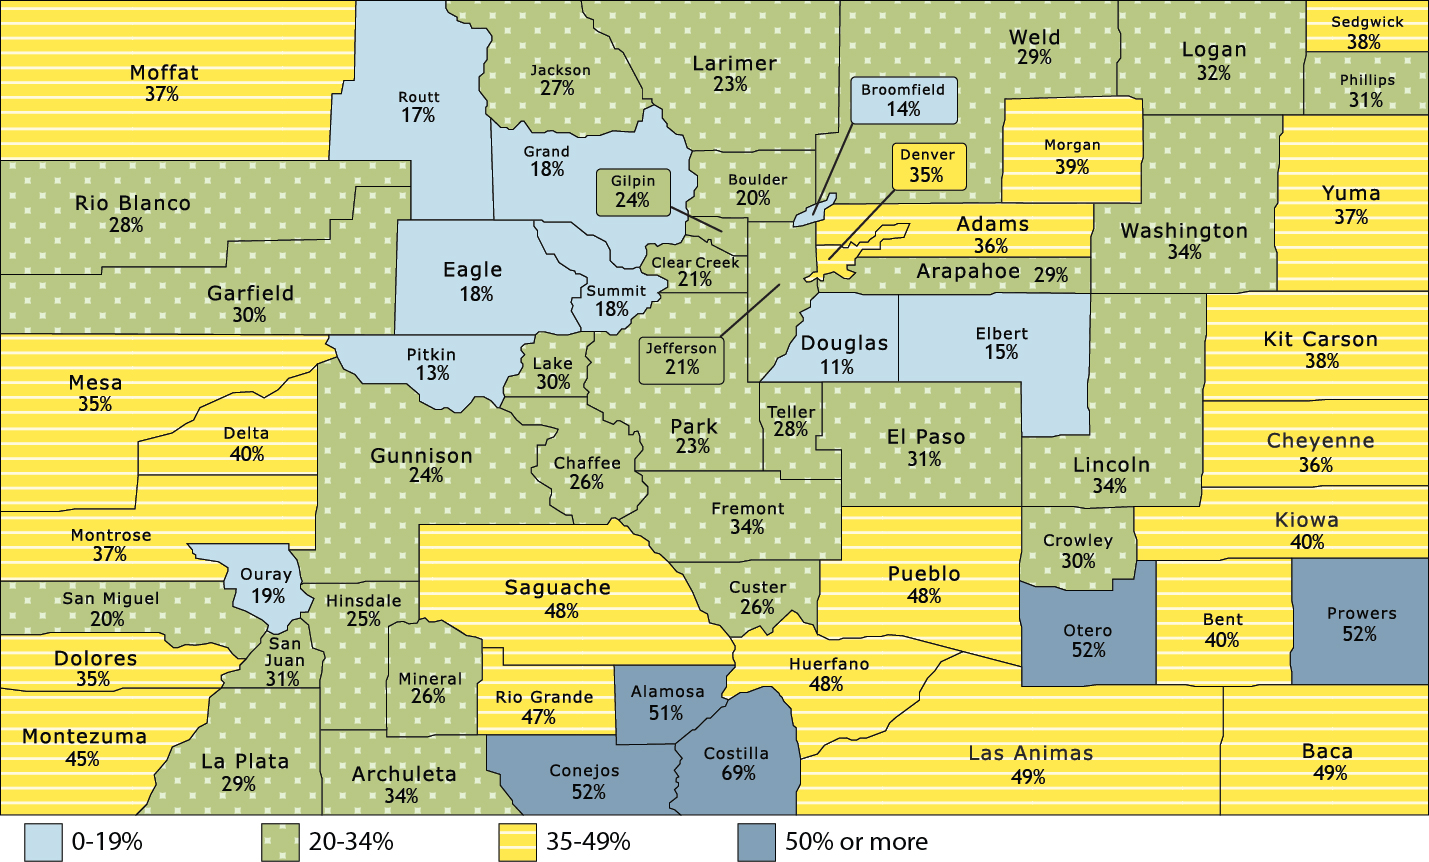 Colorado map of Health First Colorado and Child Health Plan Plus members by county, combined. 9 counties with 0-19% enrollment, 29 counties with 20-34%, 21 with 35-49% and 5 counties with 50% or more.